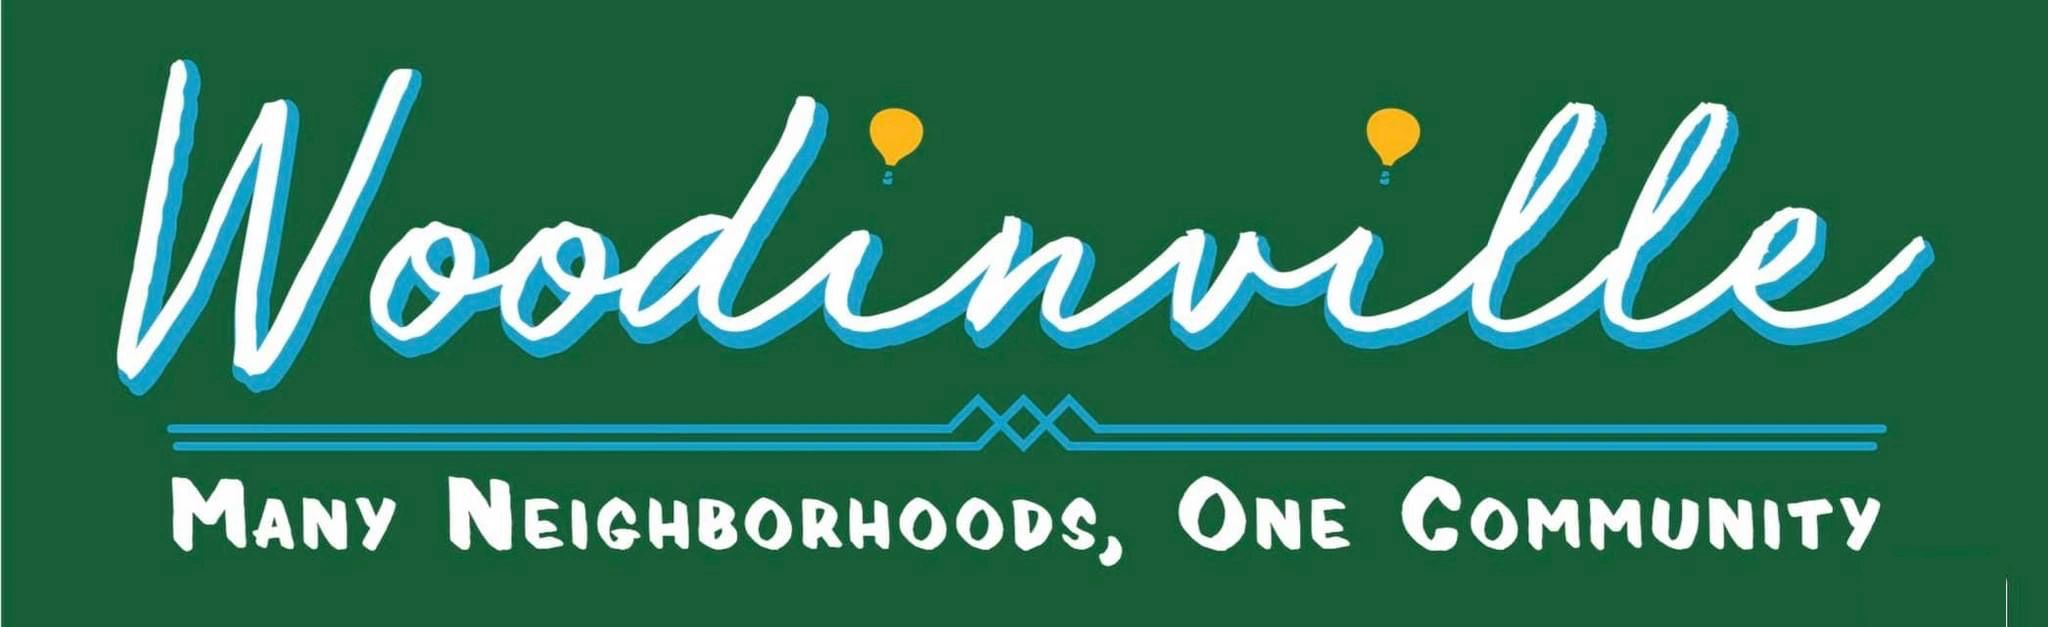 Woodinville is "Many neighborhoods, but One community" -- OneWoodinville's motto.